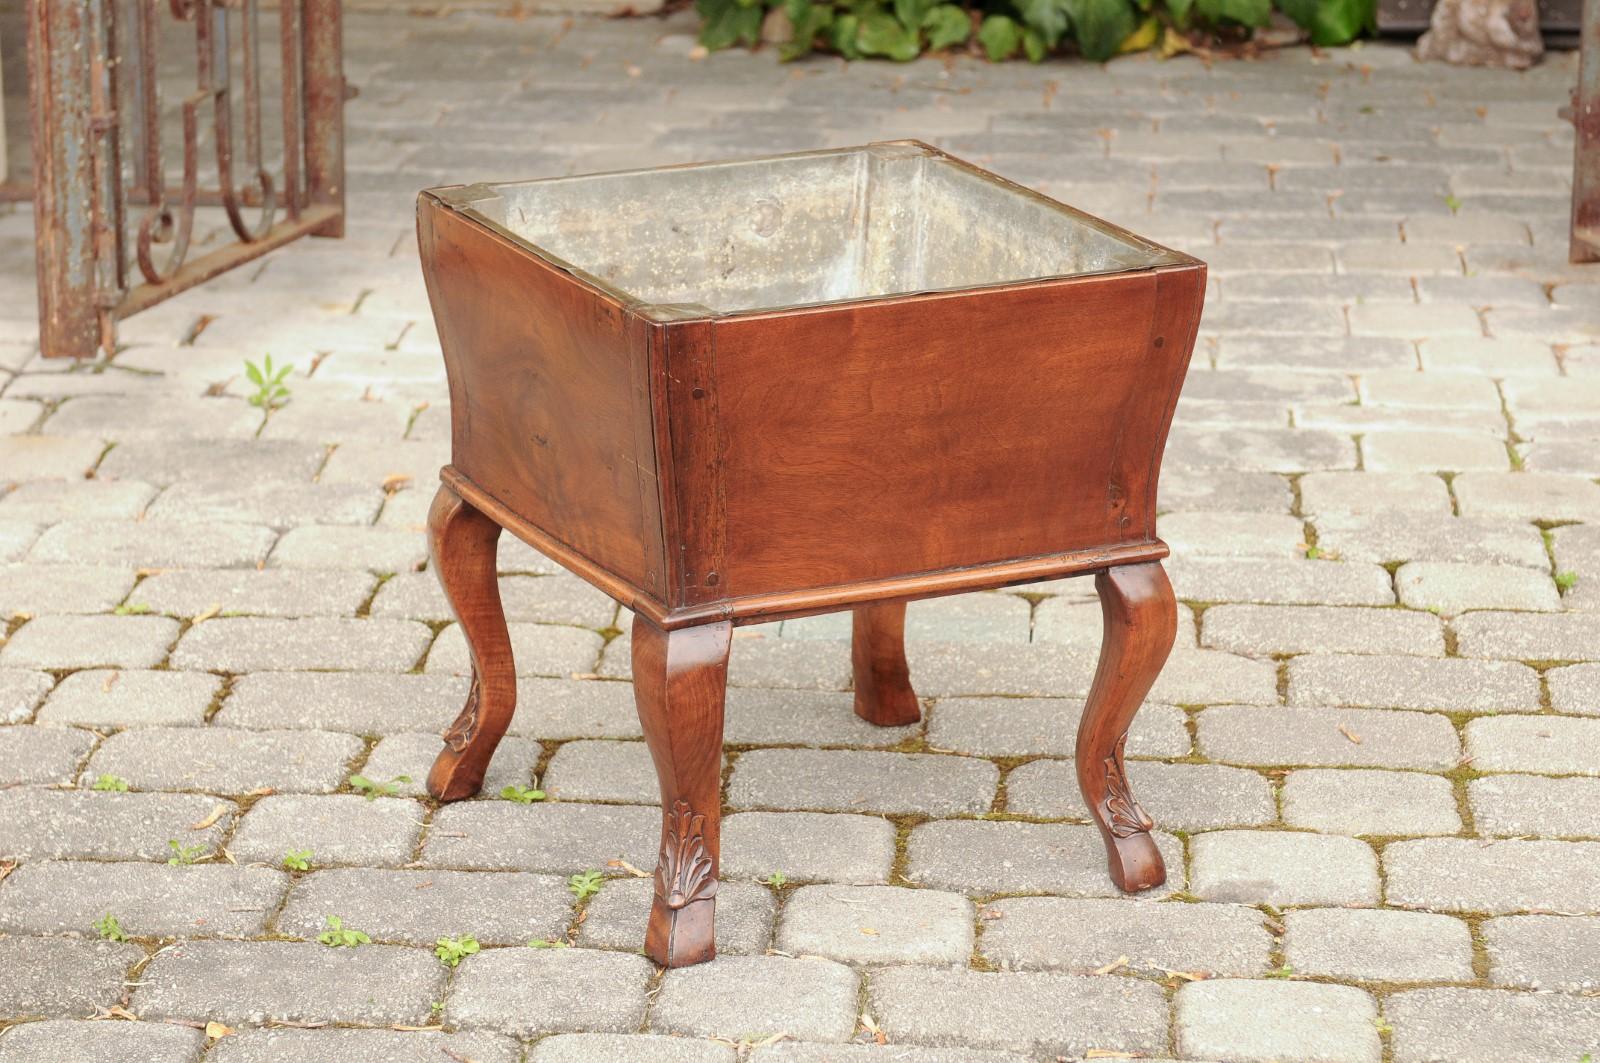 A French Napoleon III period walnut planter from the mid-19th century, with tin-lined interior and cabriole legs. Born in France in the early years of Emperor Napoleon III's reign, this charming walnut planter features a square tin-lined tapering